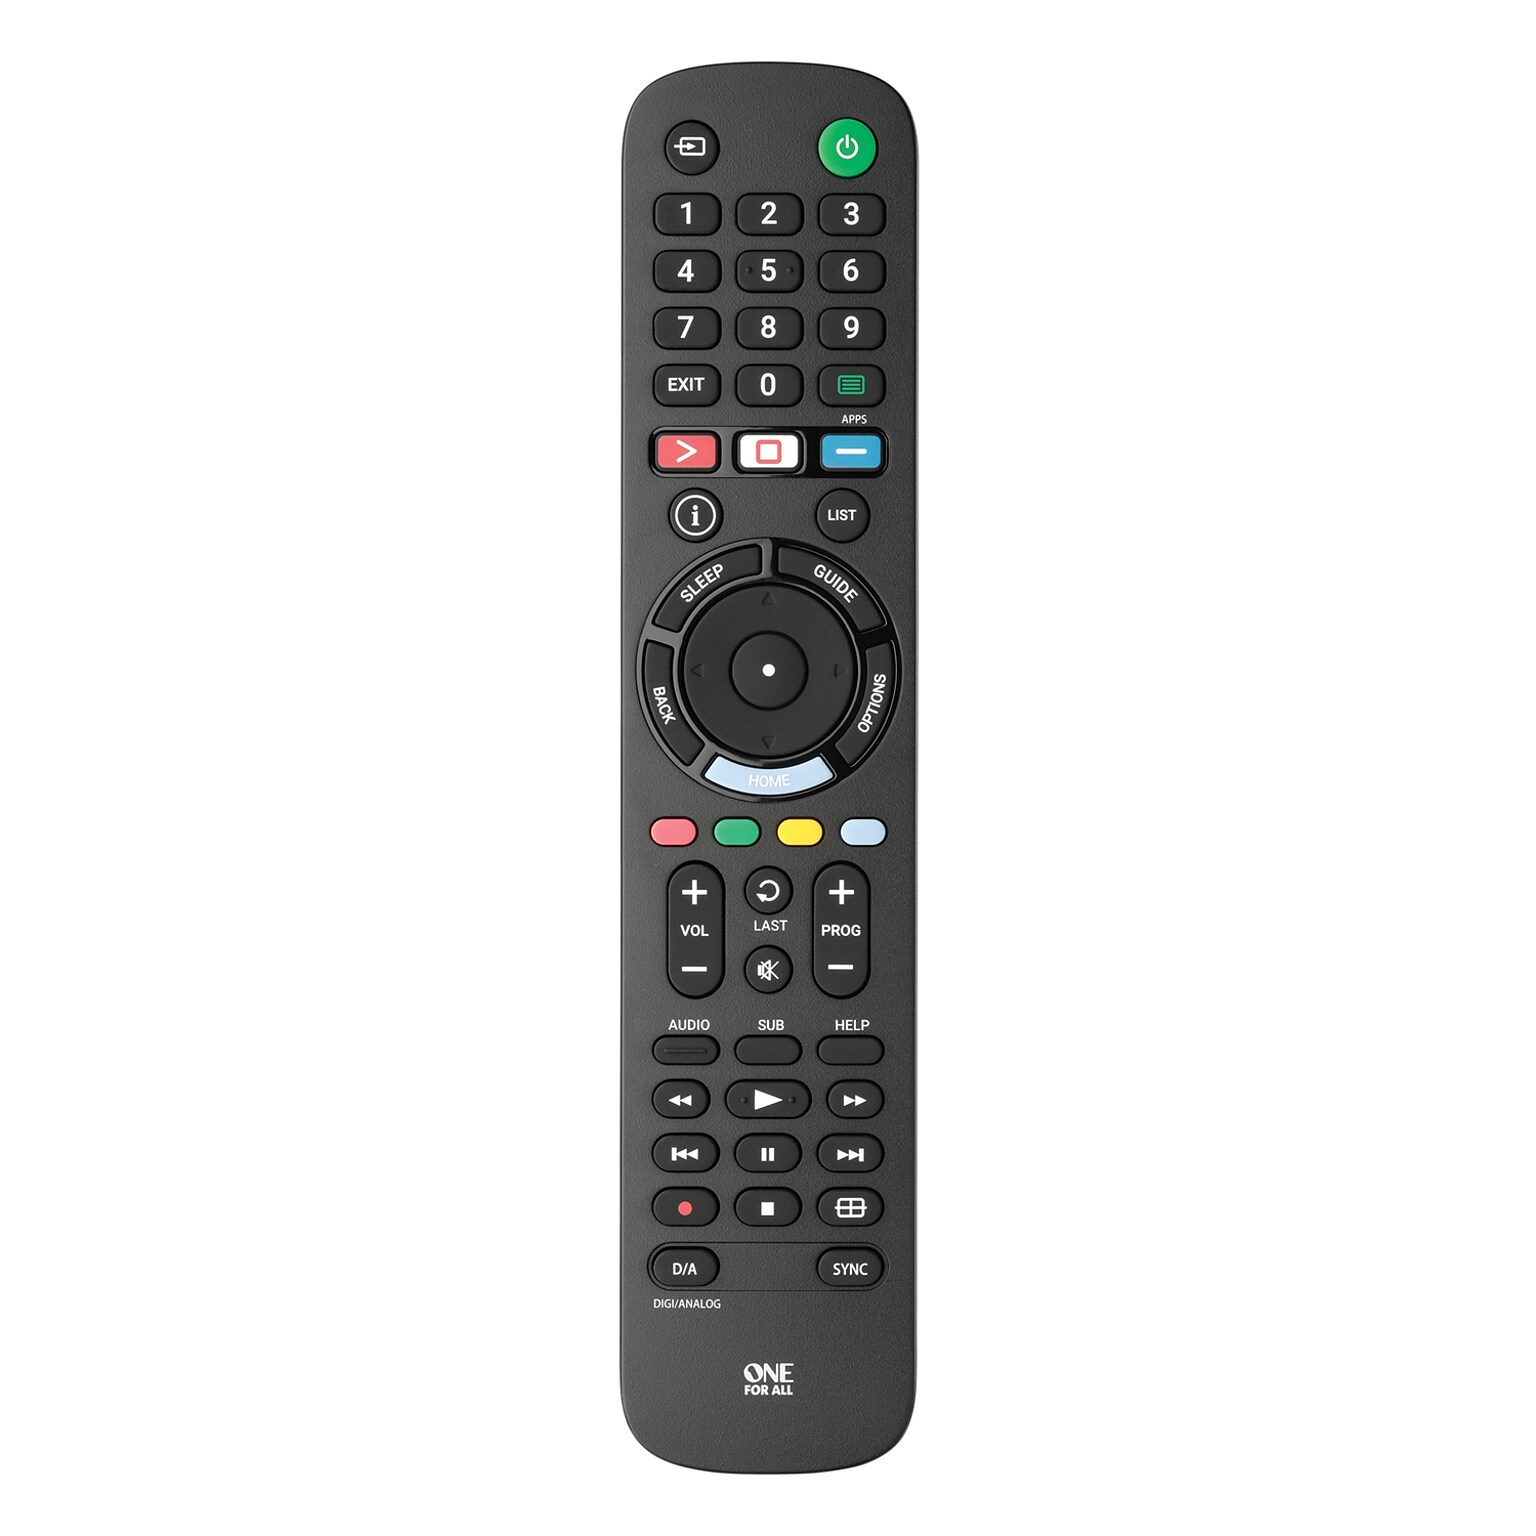 ONE FOR ALL Replacement Remote for Sony TV, Black (UEBVURC4812)